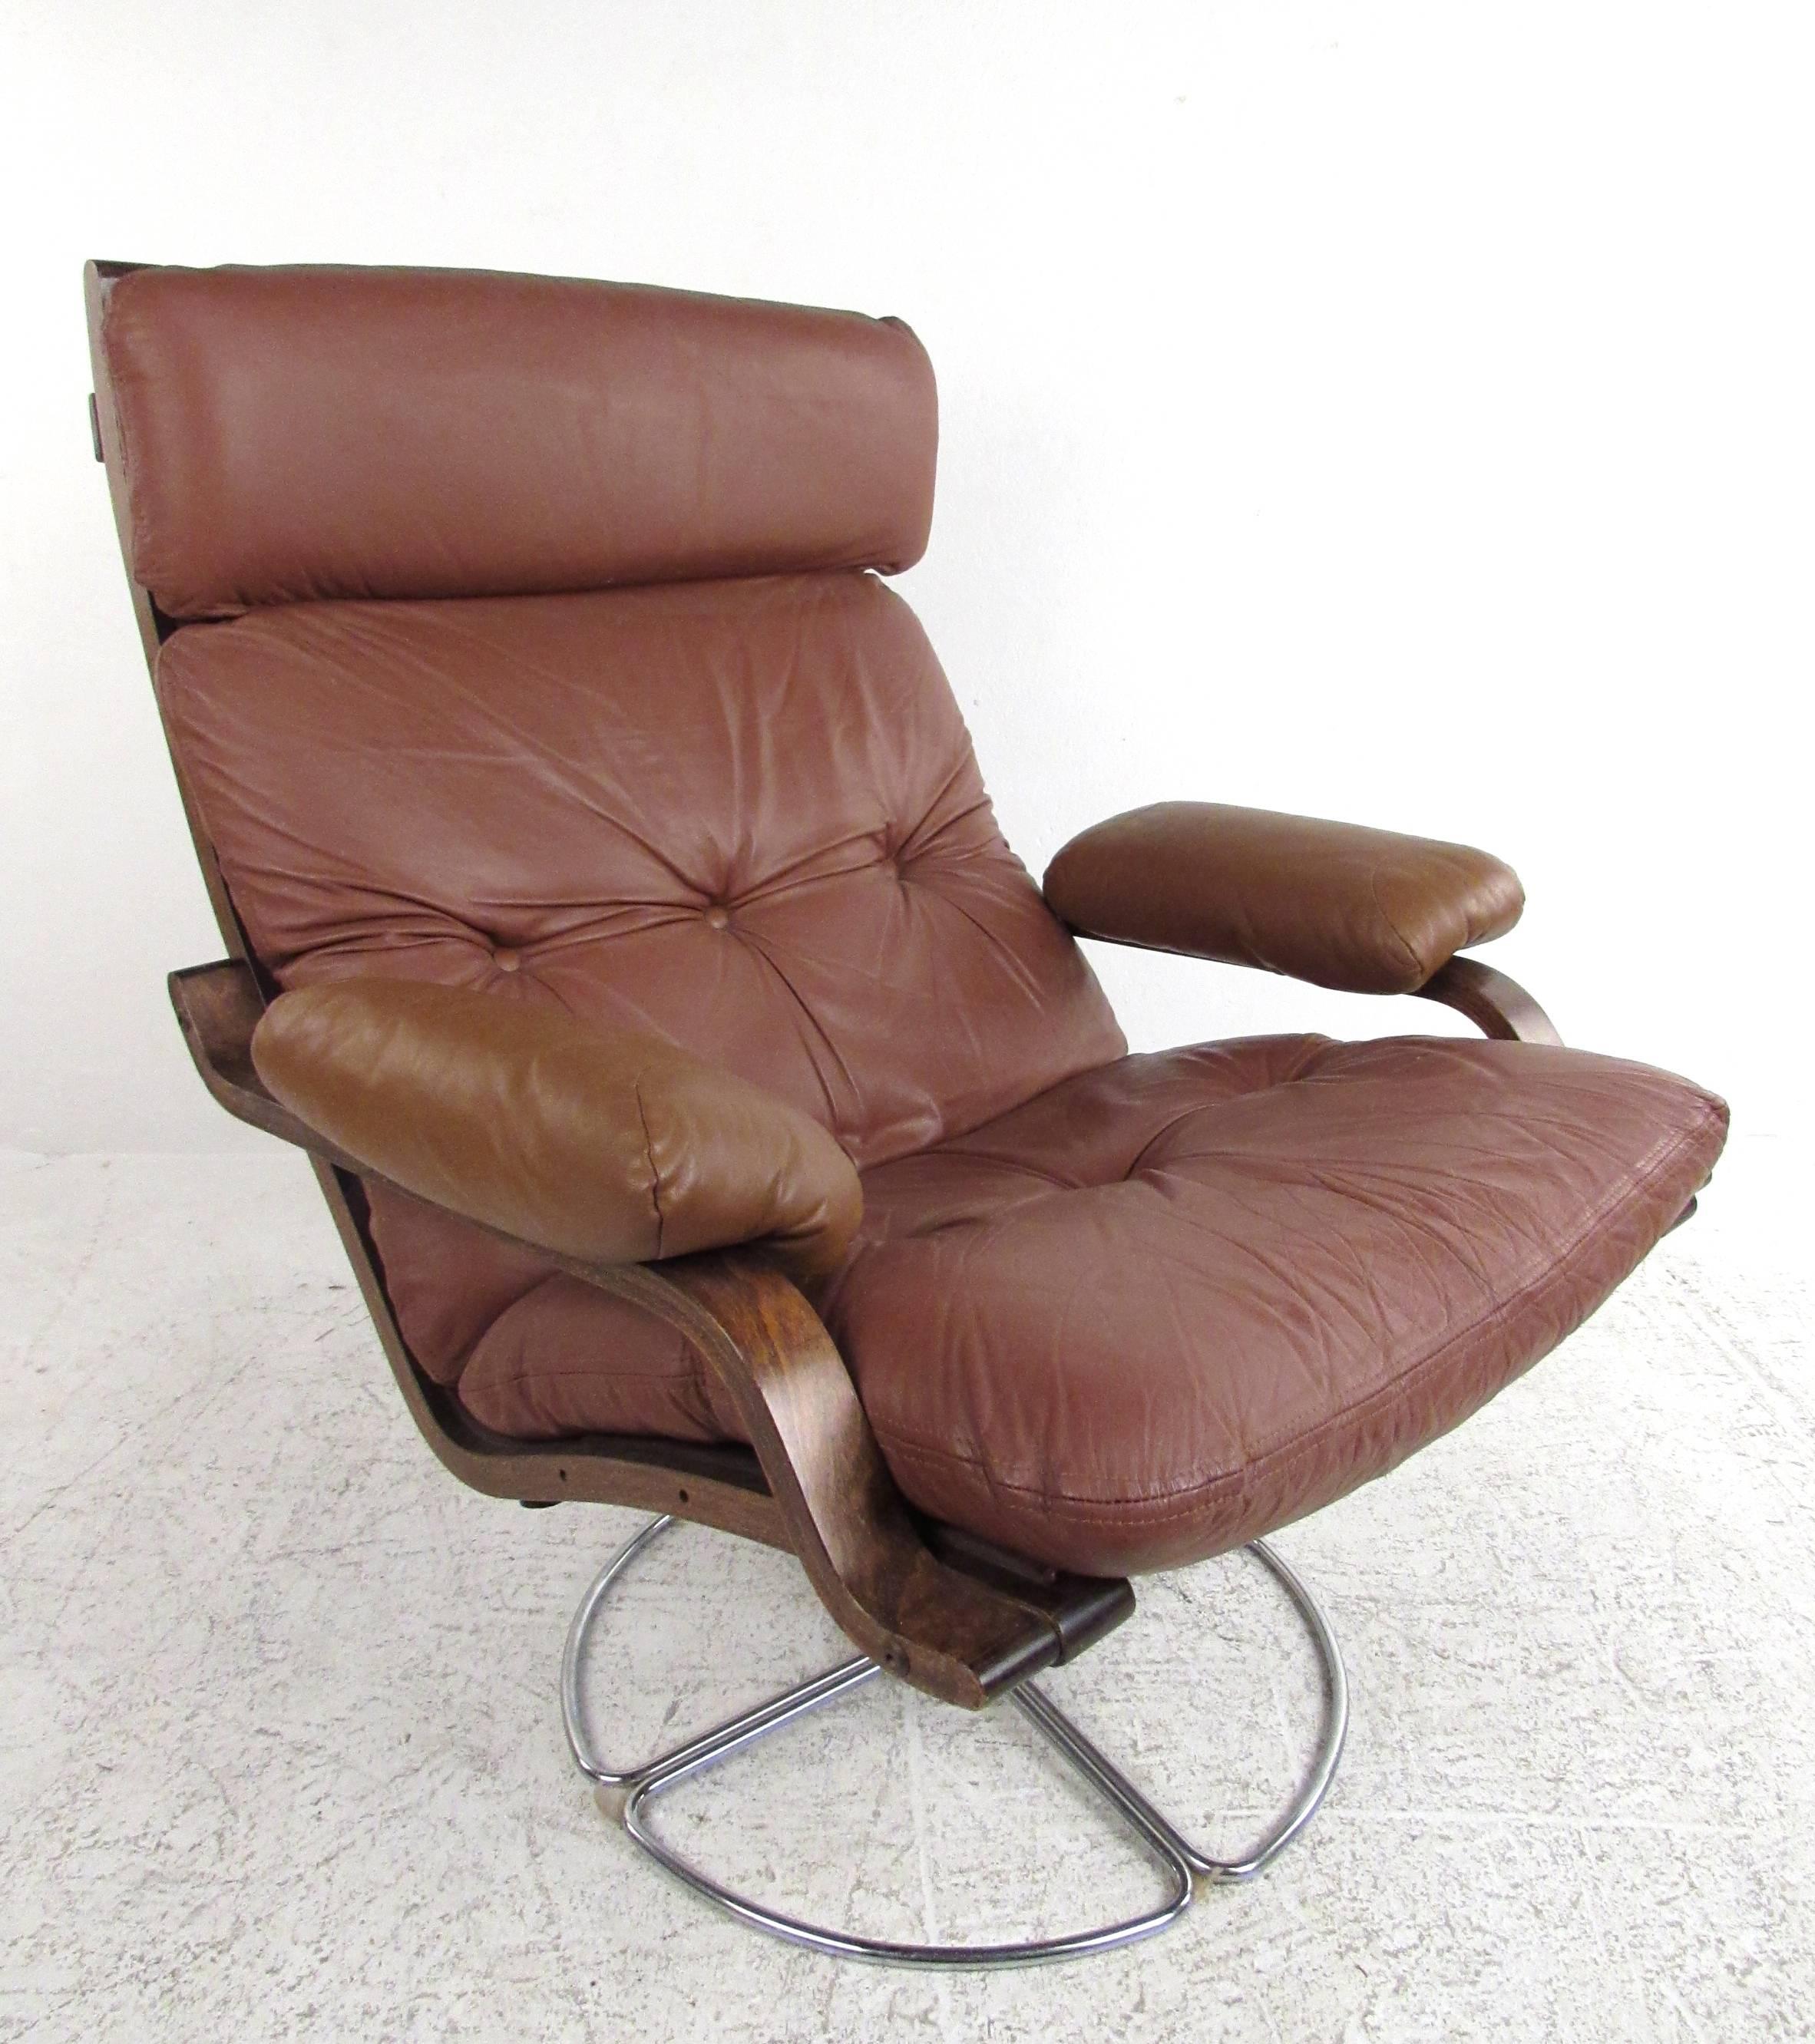 This unique vintage swivel chair features tufted vinyl upholstery, bentwood frame and swivel chrome base. Matching ottoman makes this a versatile seating option for home or office. Please confirm item location (NY or NJ).